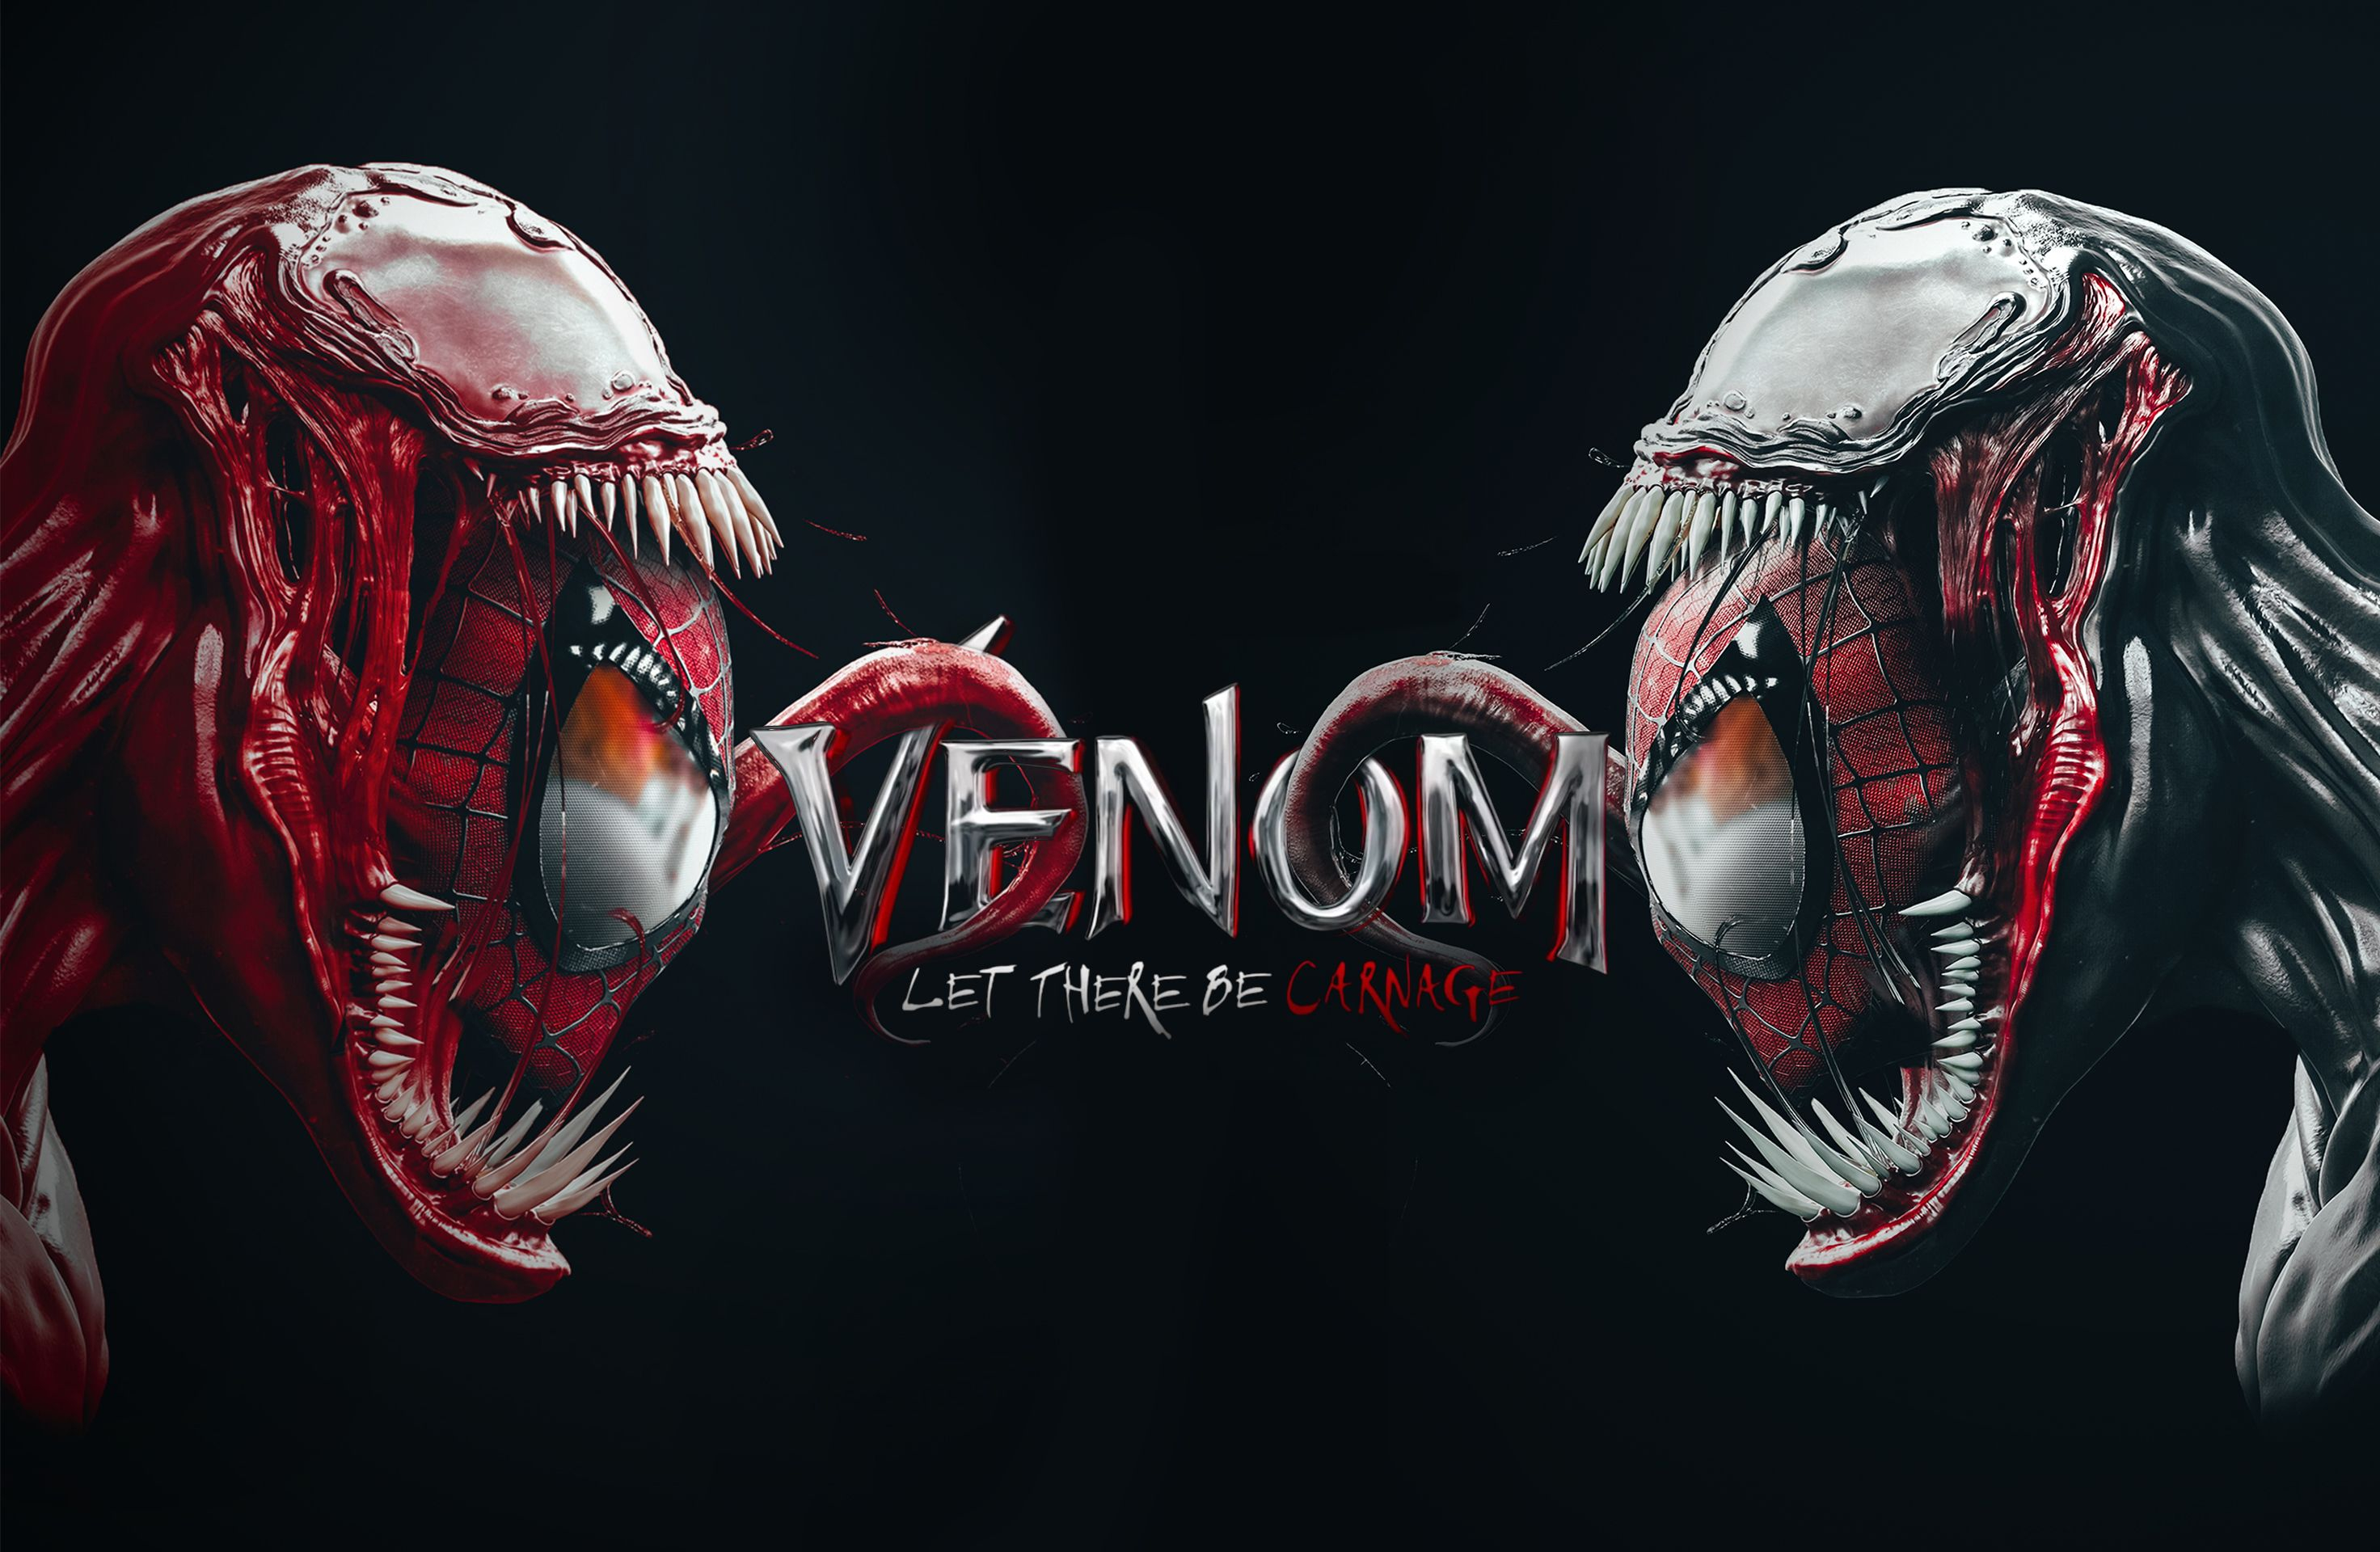 2944x1920 Venom Let There Be Carnage Wallpapers Top Free Venom Let There Be Carnage Backgrounds